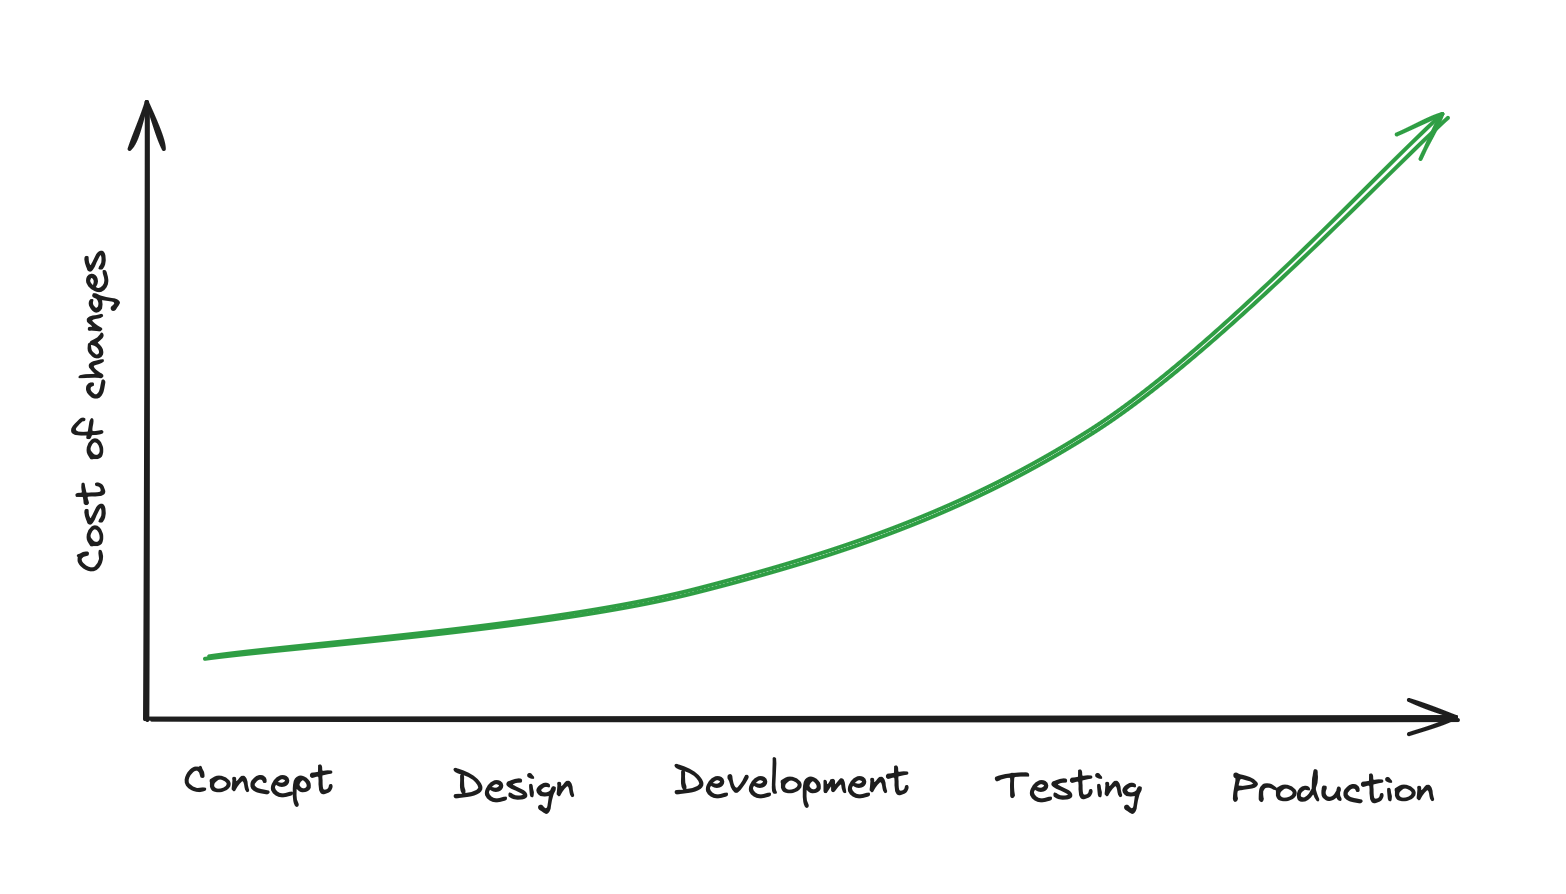 Relative cost of changes in web development depends on the stage